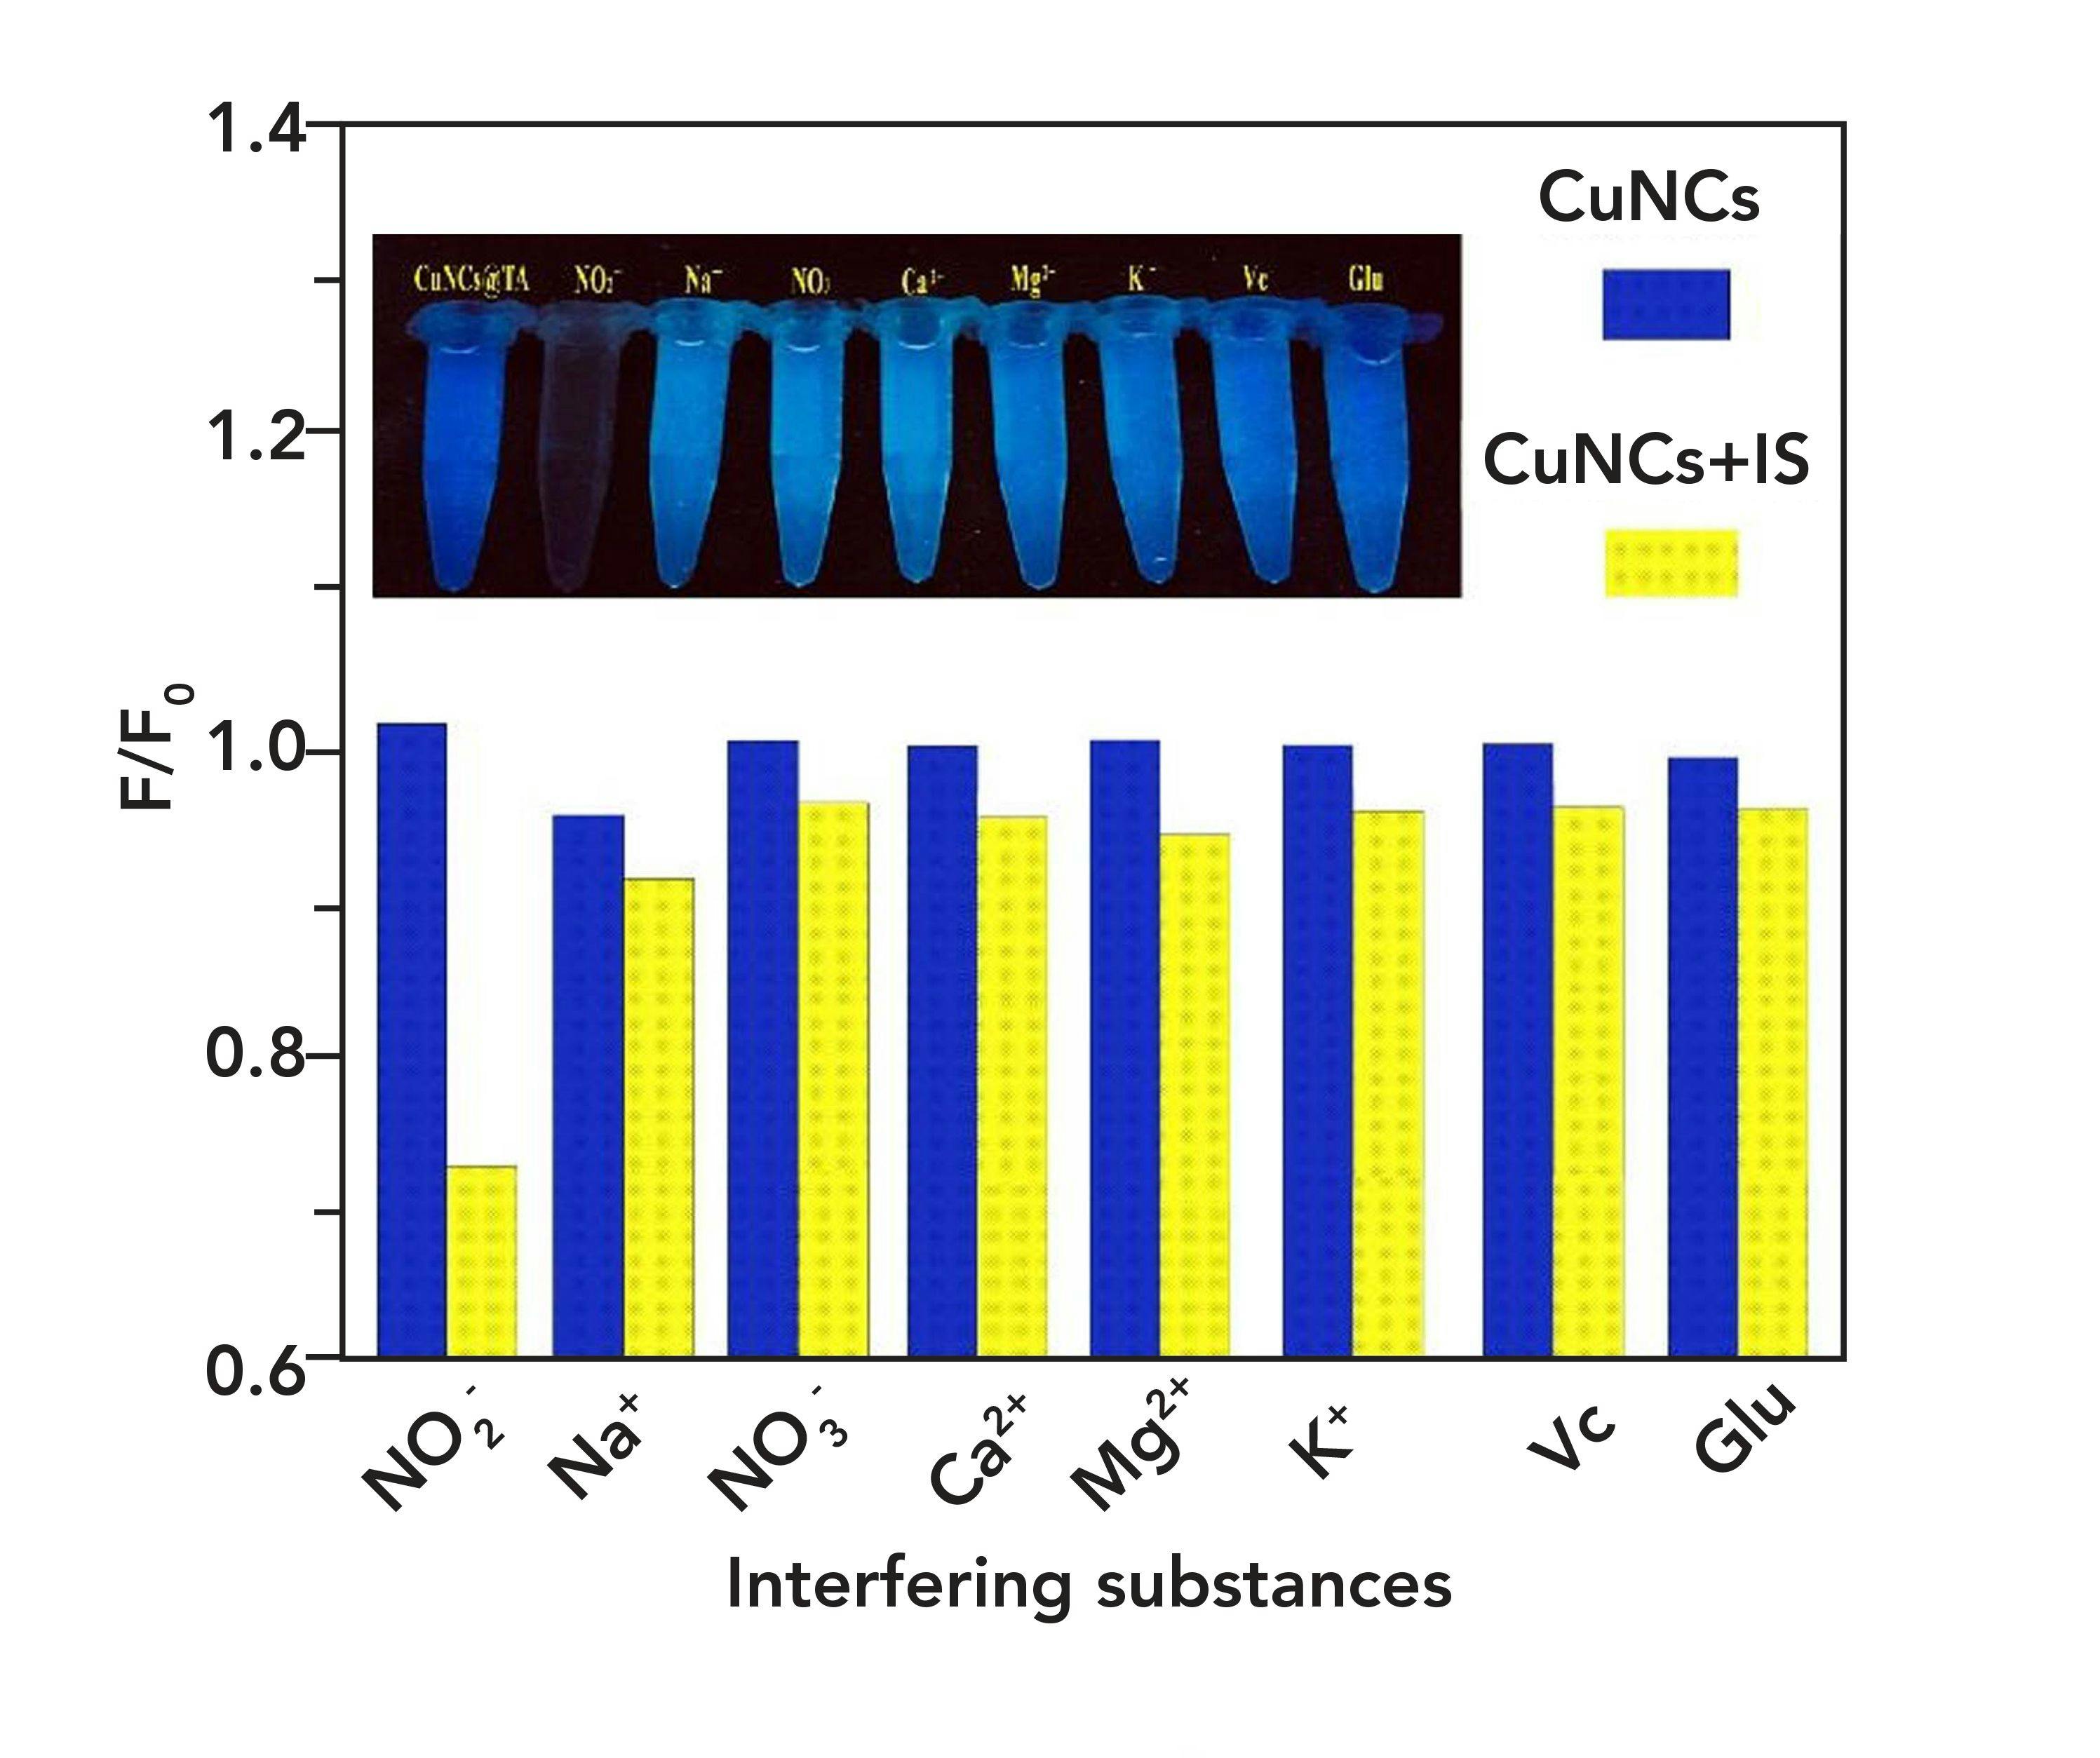 FIGURE 5: The fluorescence intensity ratio (F/F0) of TA-CuNCs (0.5 mg/mL) in the presence of various interfering substances. Inset image shows corresponding vials of sample with respective interfering material.